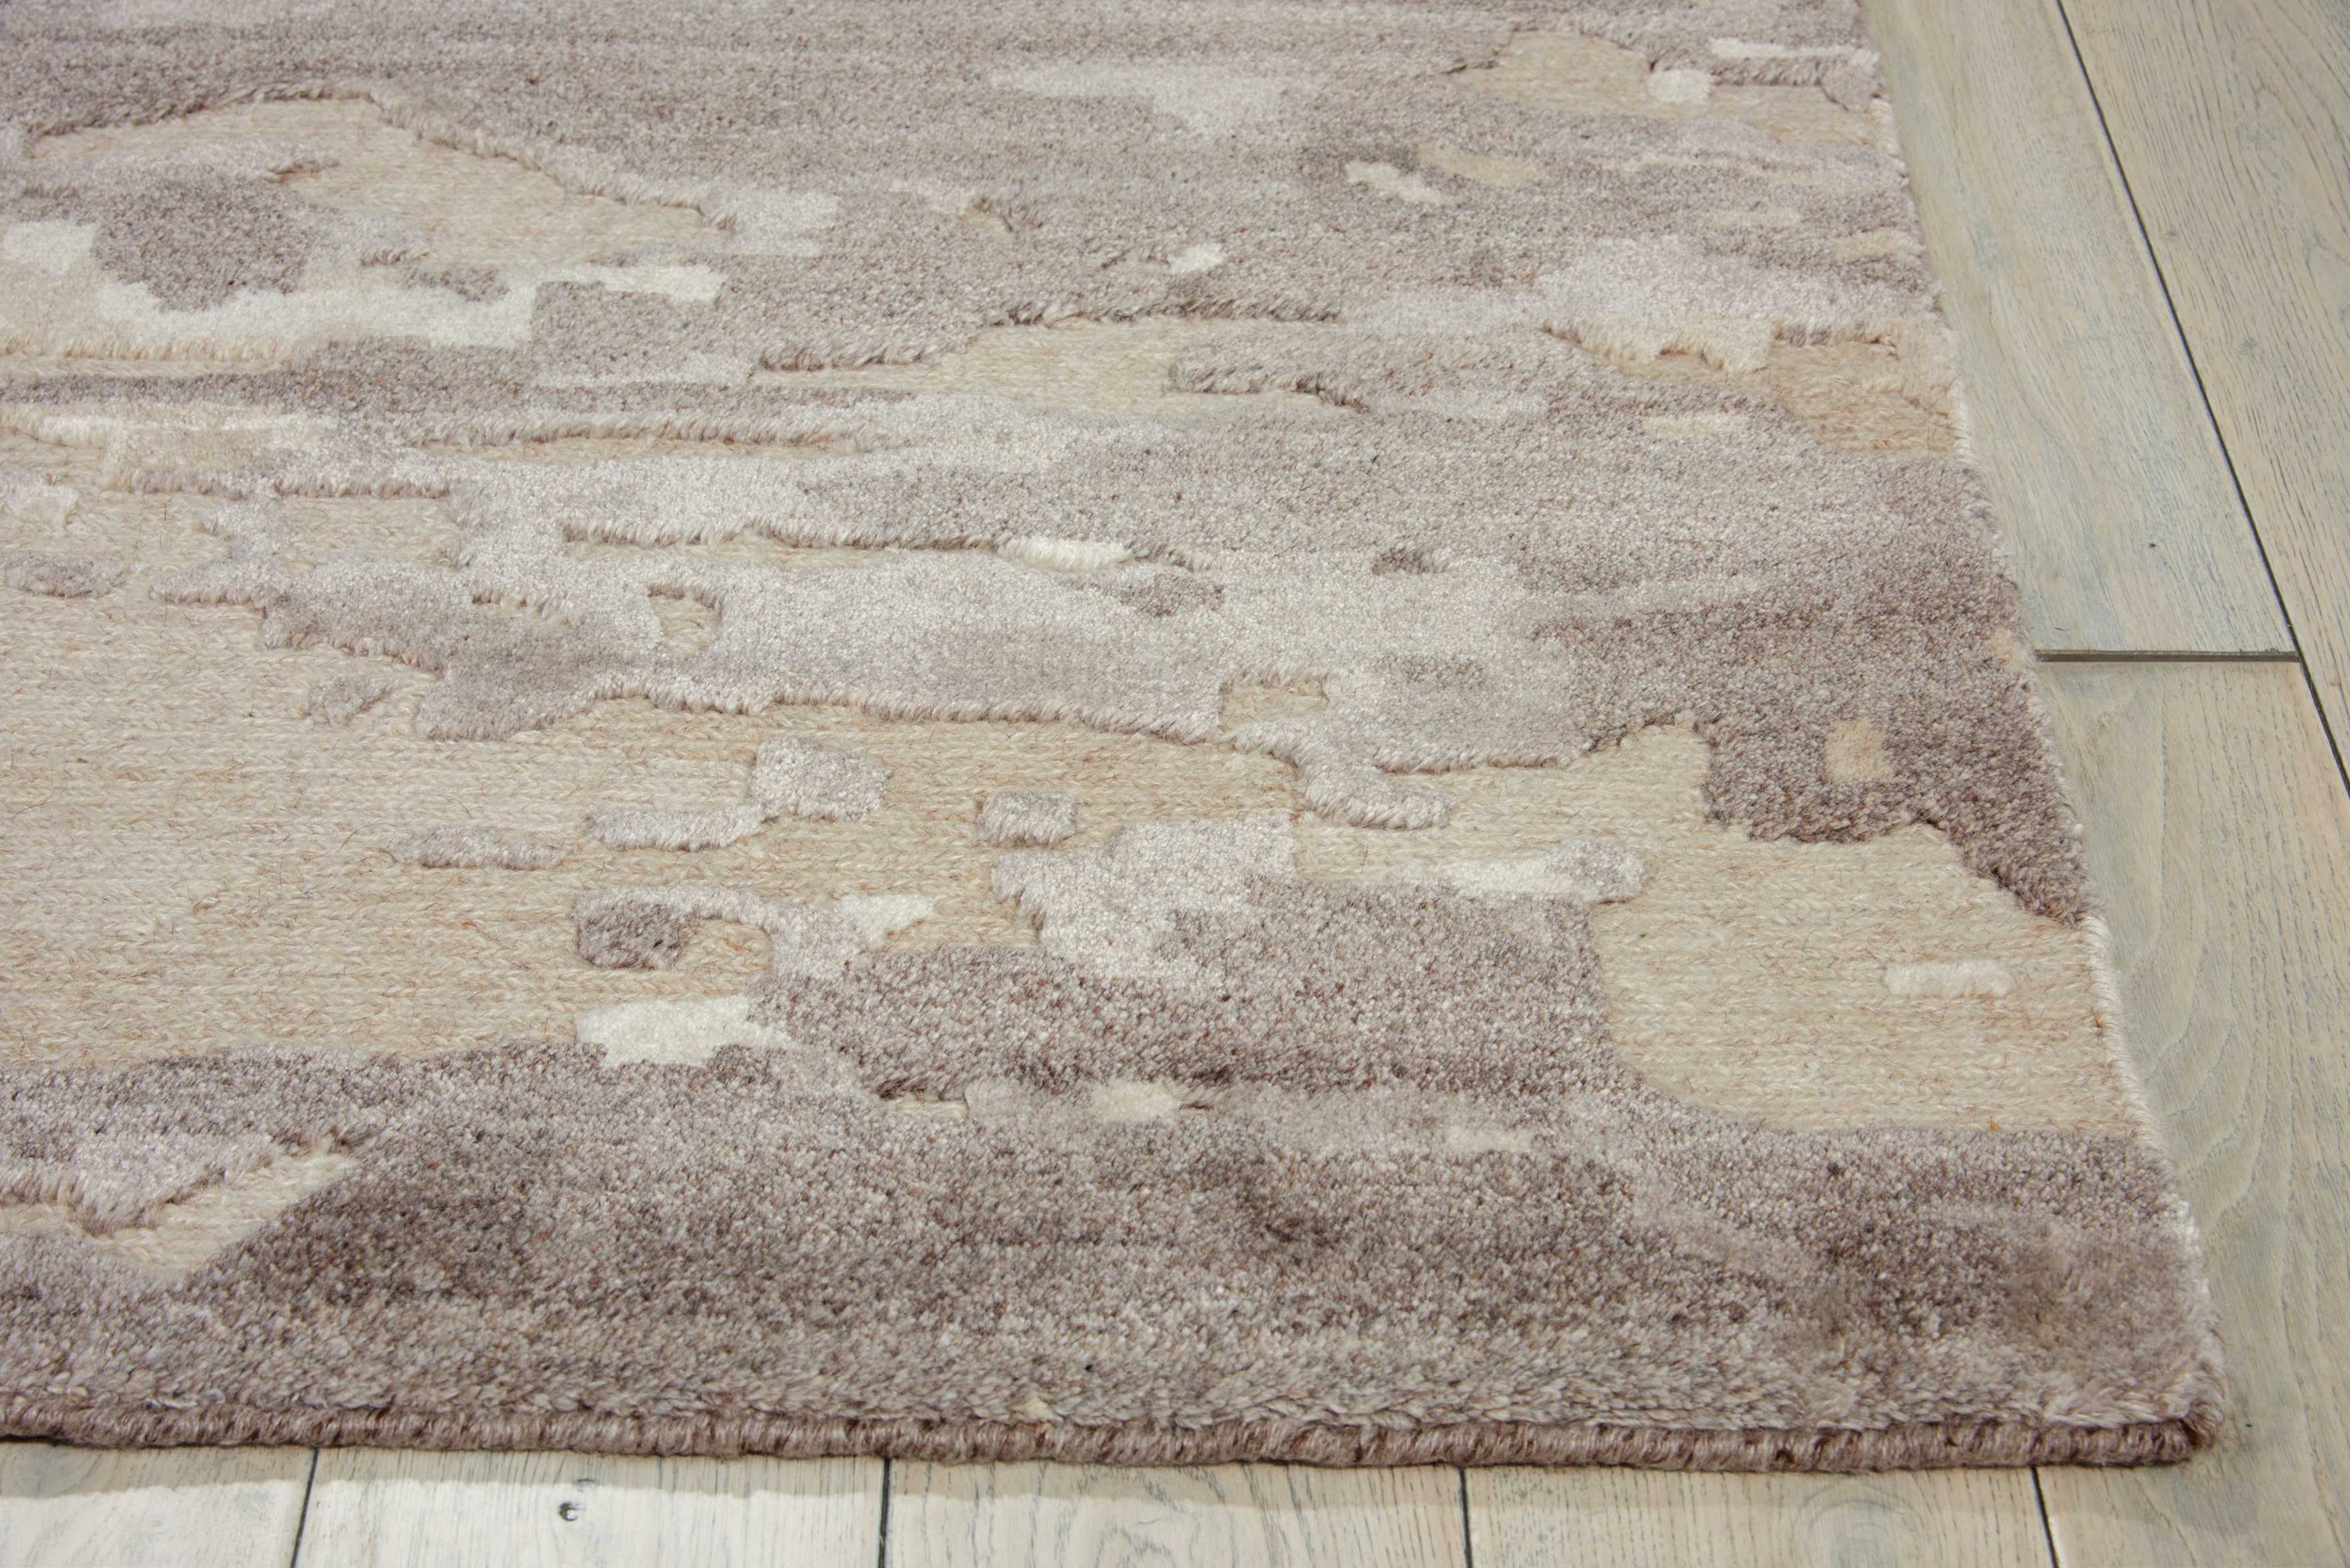 Close-up of a plush area rug with abstract beige-brown pattern.